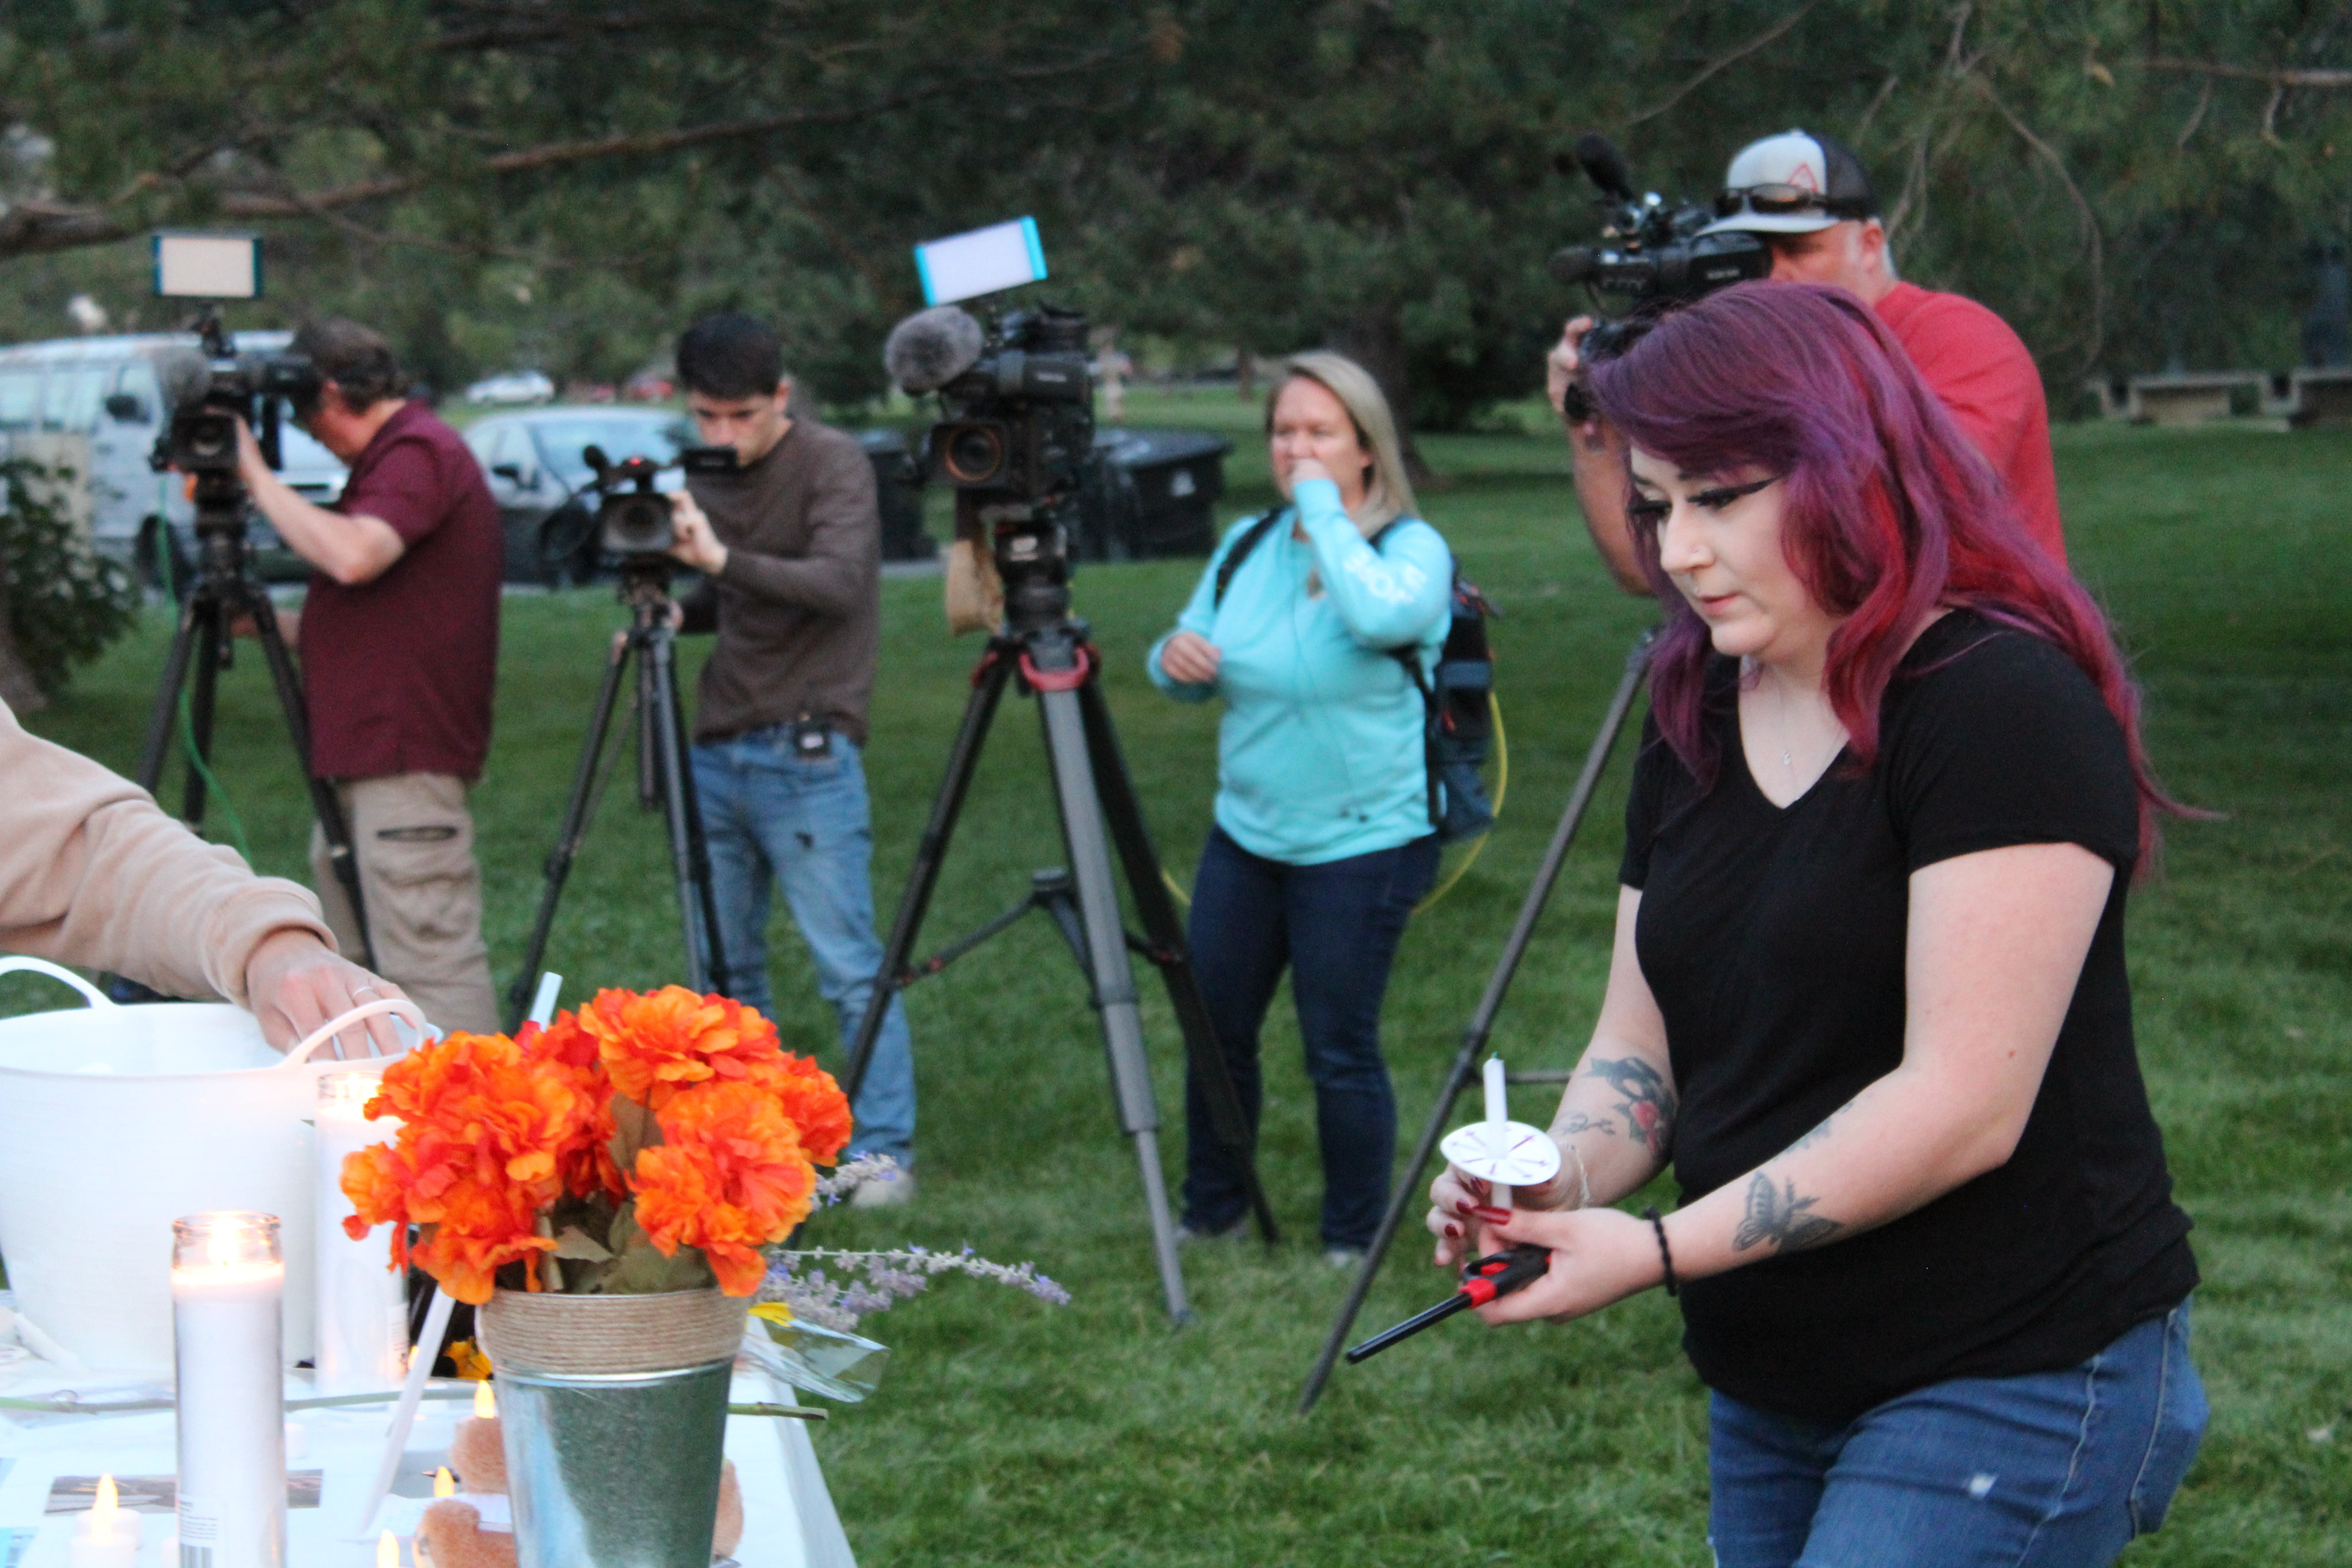 Salt Lake City resident Serena Chavez lights a candle at the vigil she organized honoring Gabby Petito on Wednesday, Sept. 22.